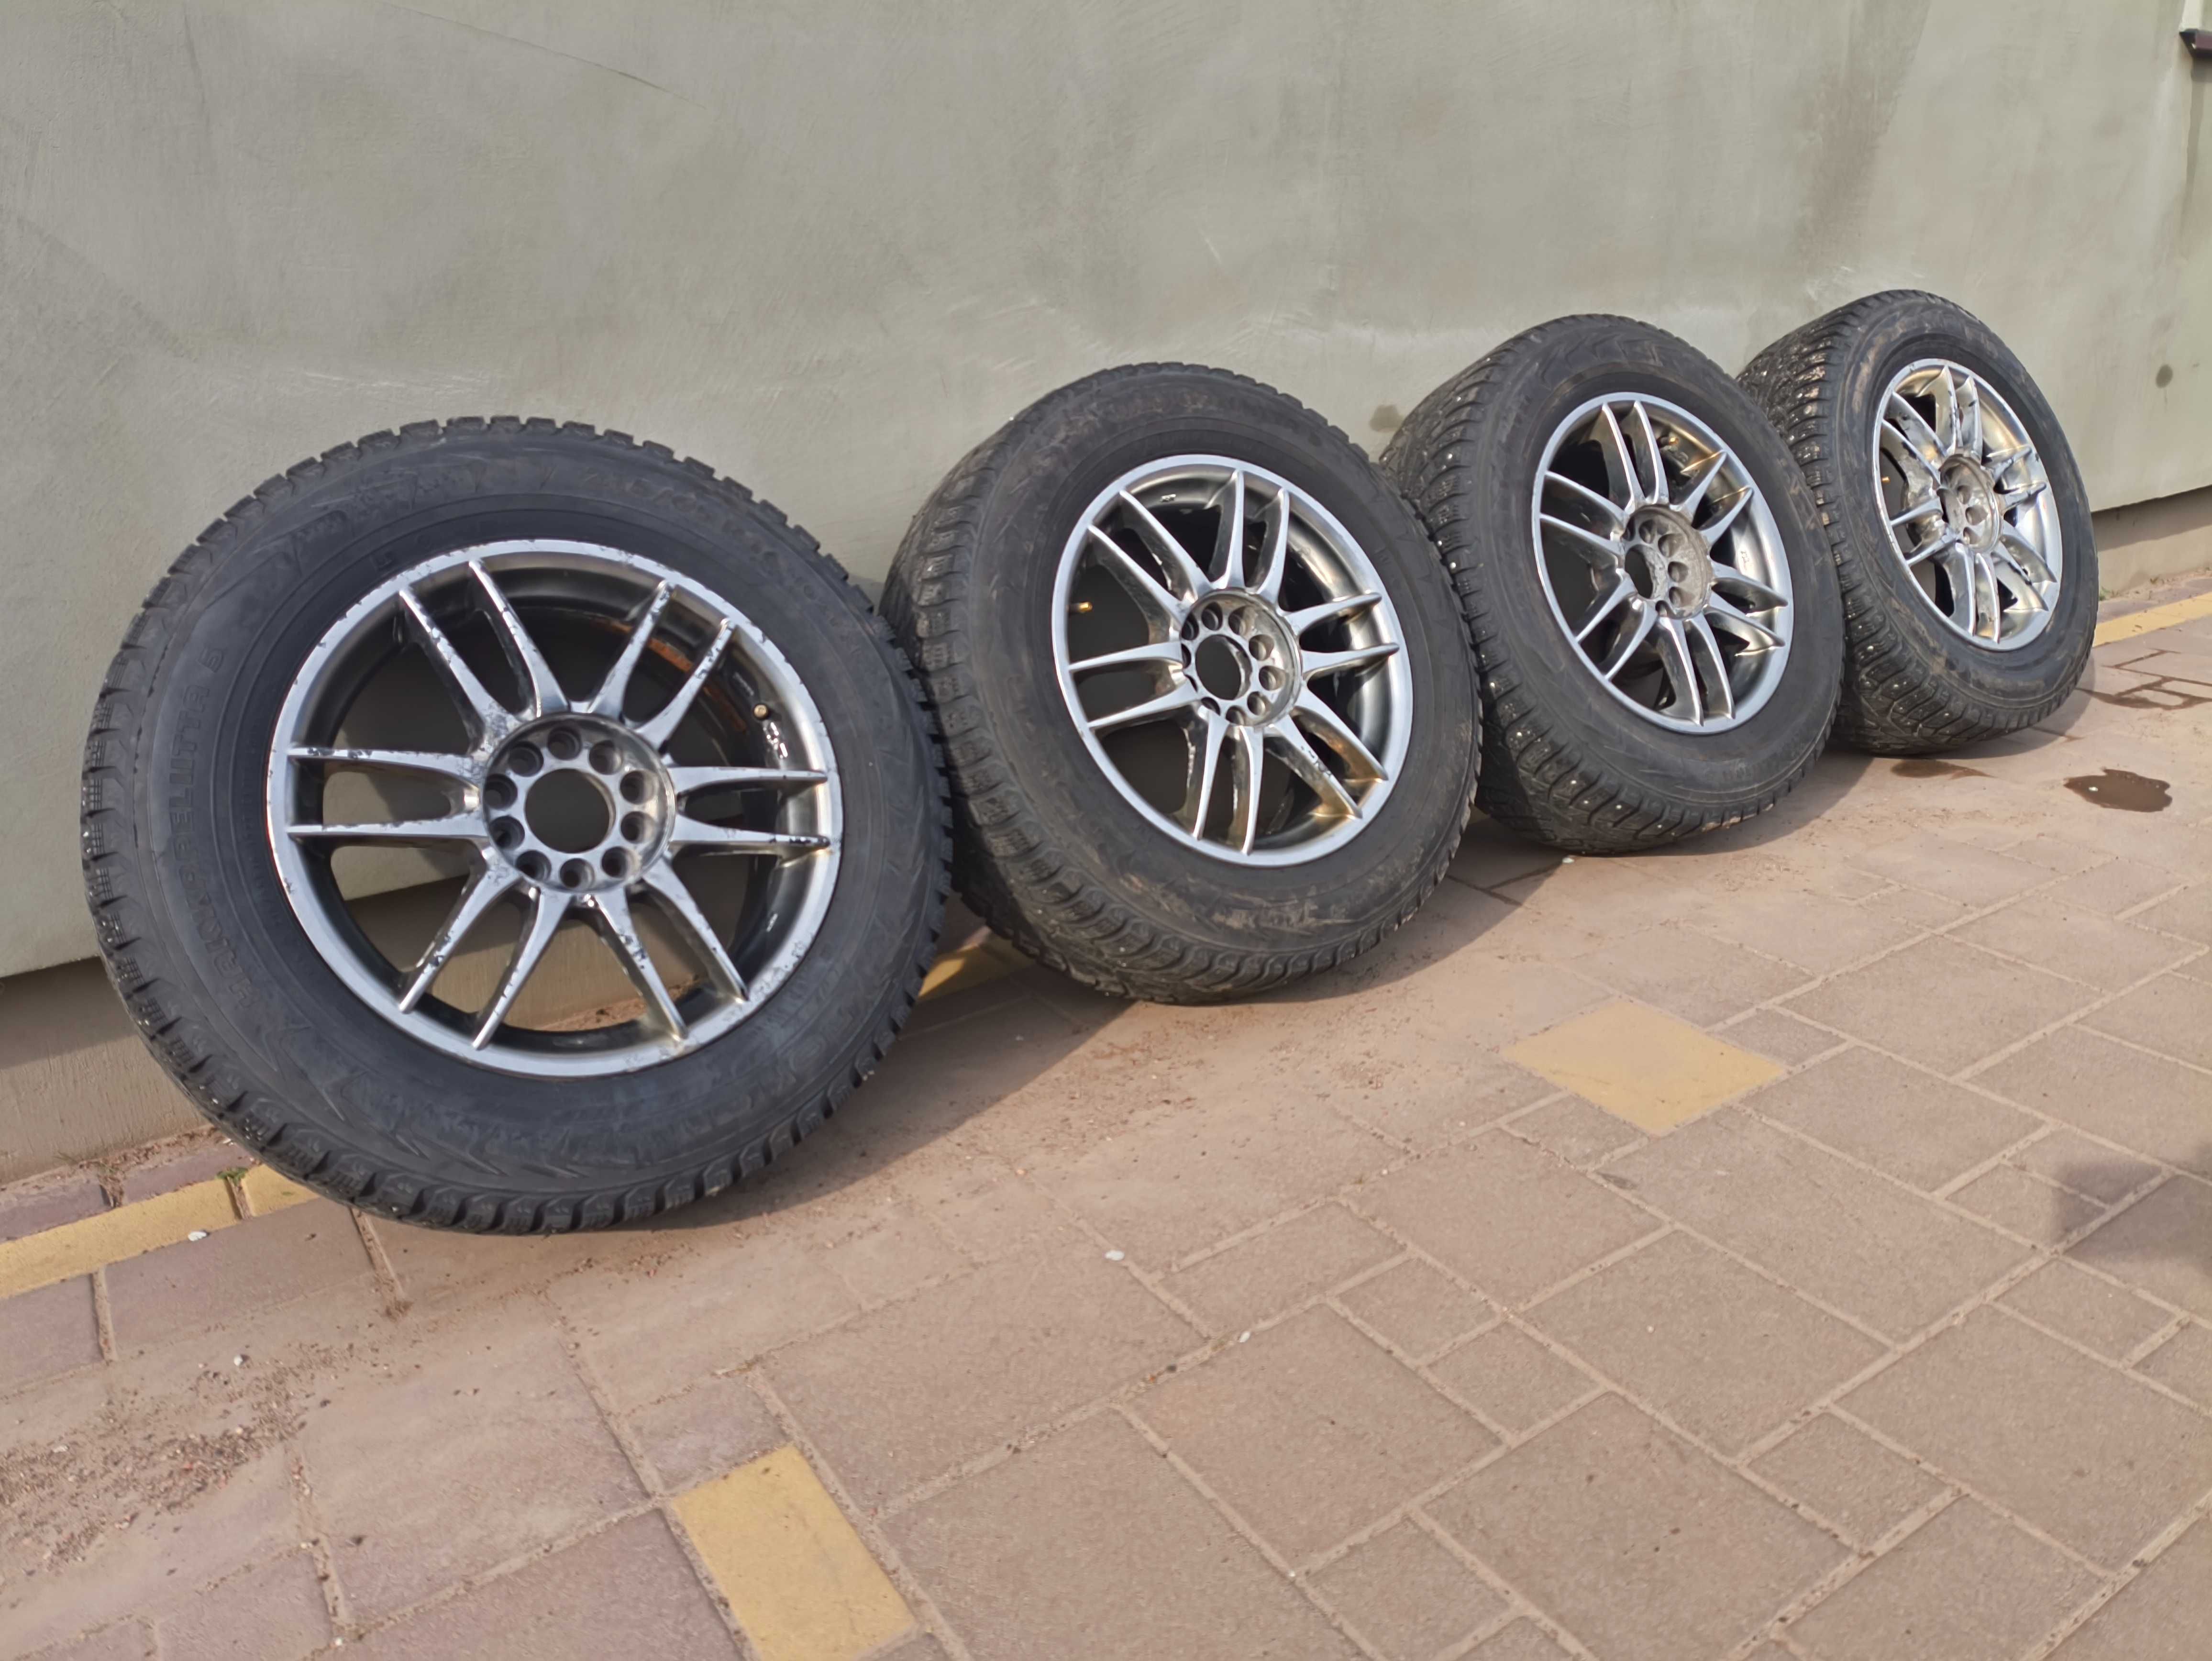 Диски R16 5x108 5x114.3 Renault Nissan Mazda Ford Volvo Peugeot.